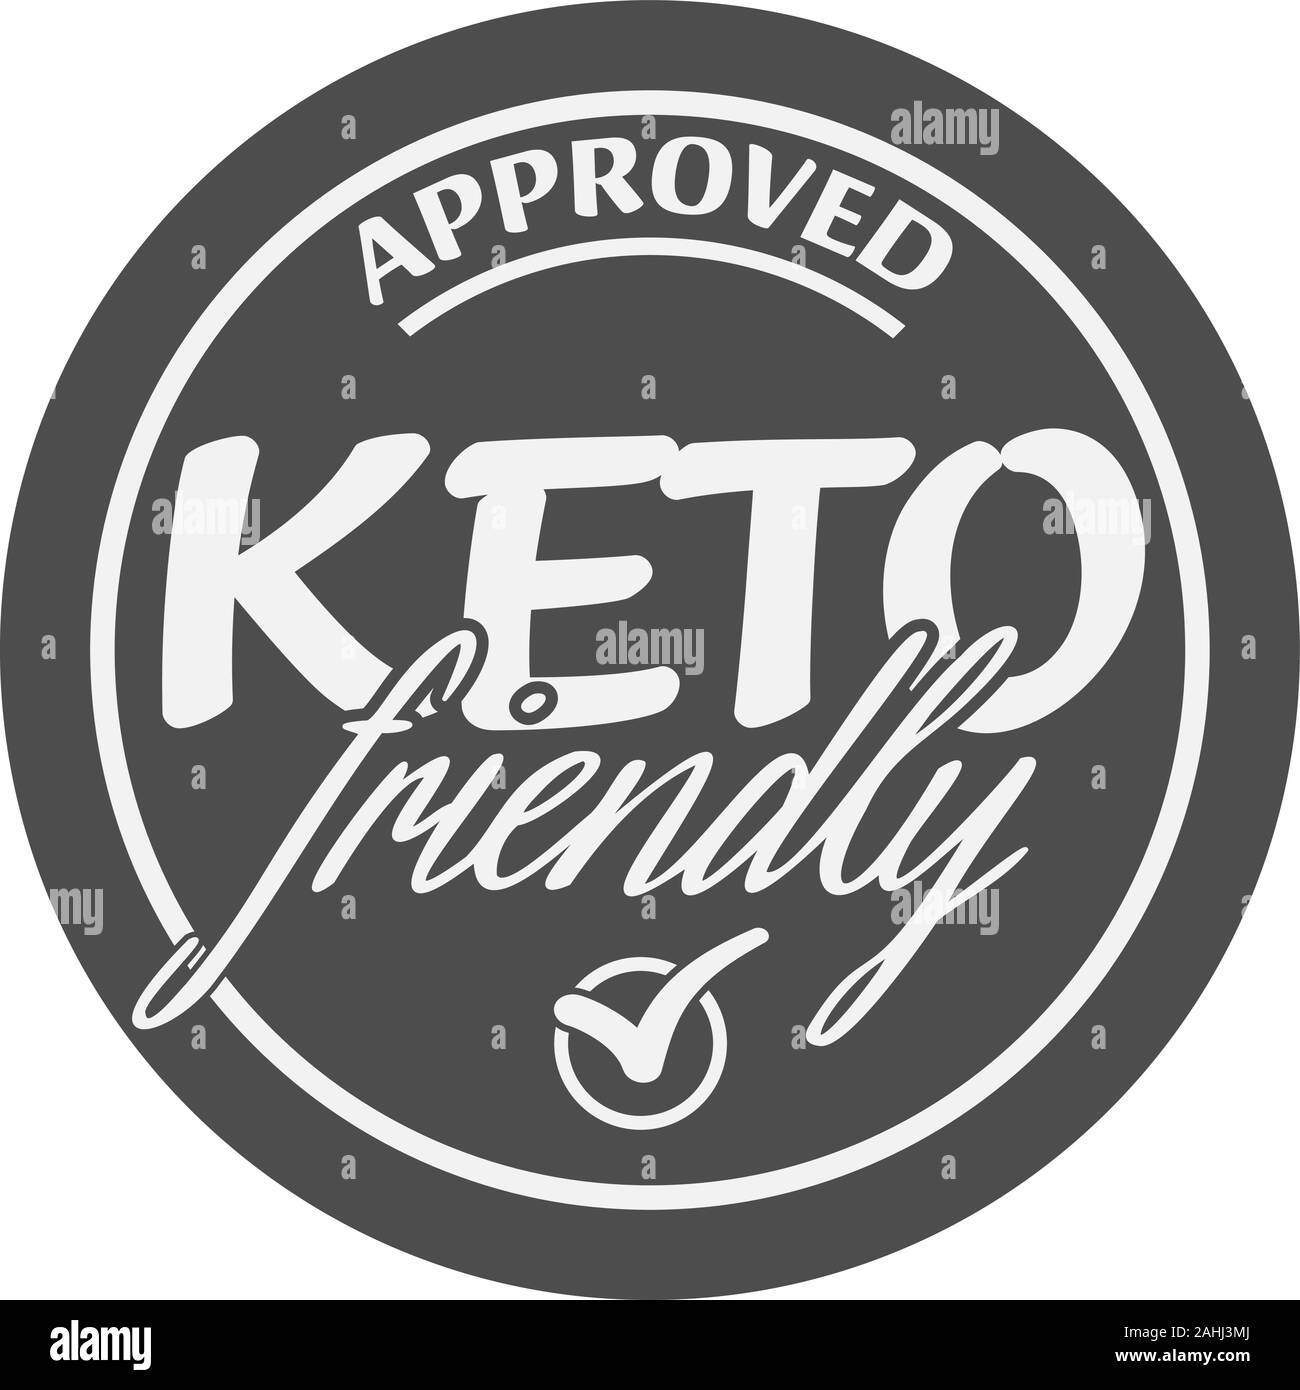 keto friendly sticker or label vector illustration for food suitable for ketogenic diet Stock Vector